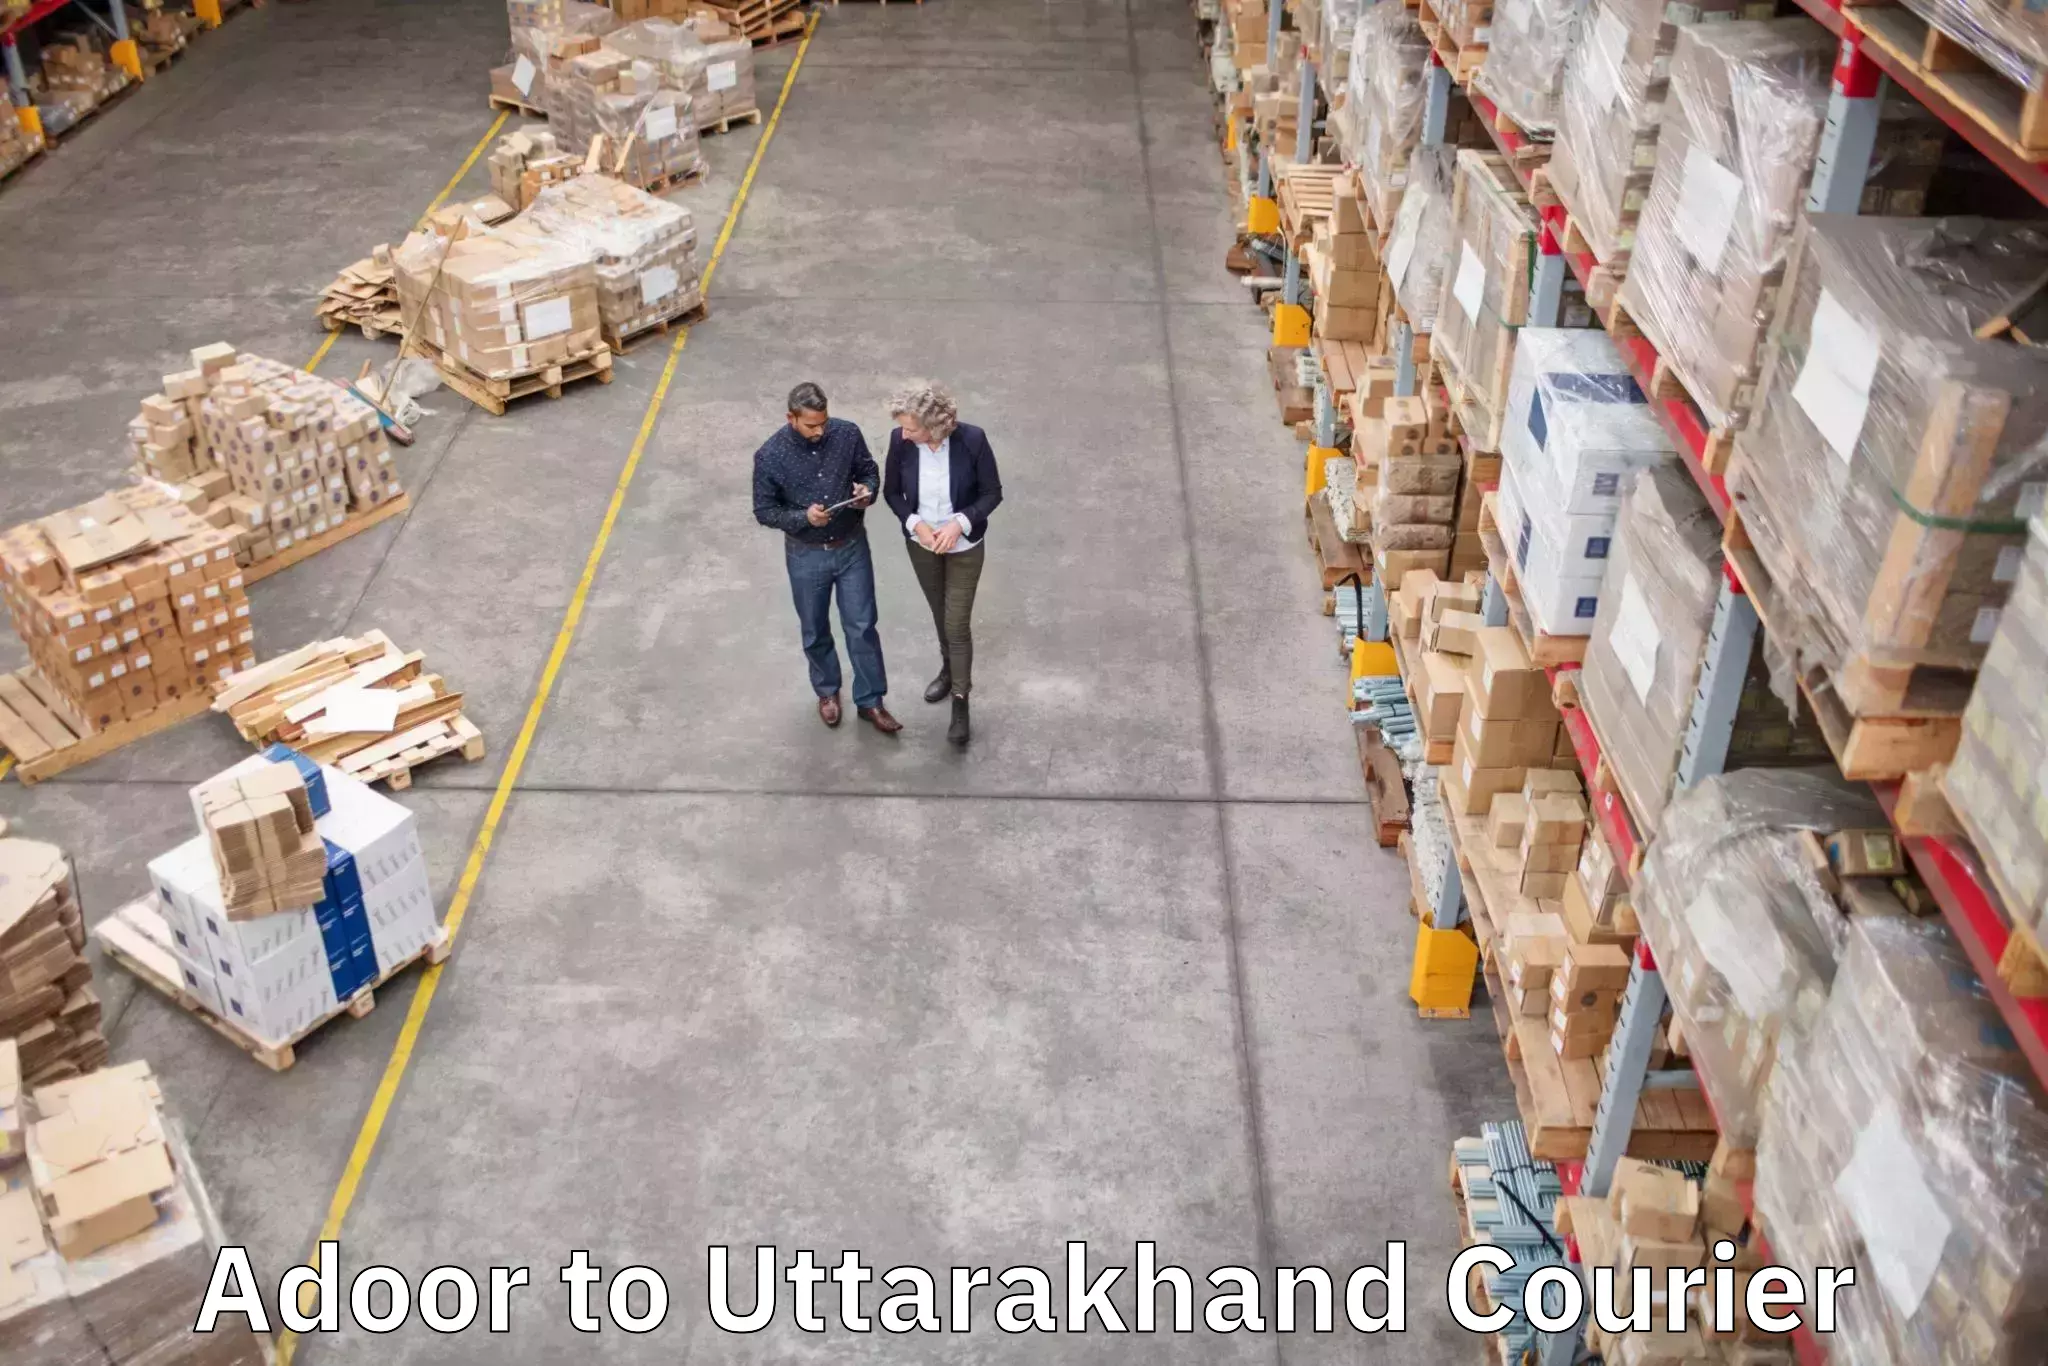 Luggage delivery logistics Adoor to Uttarakhand